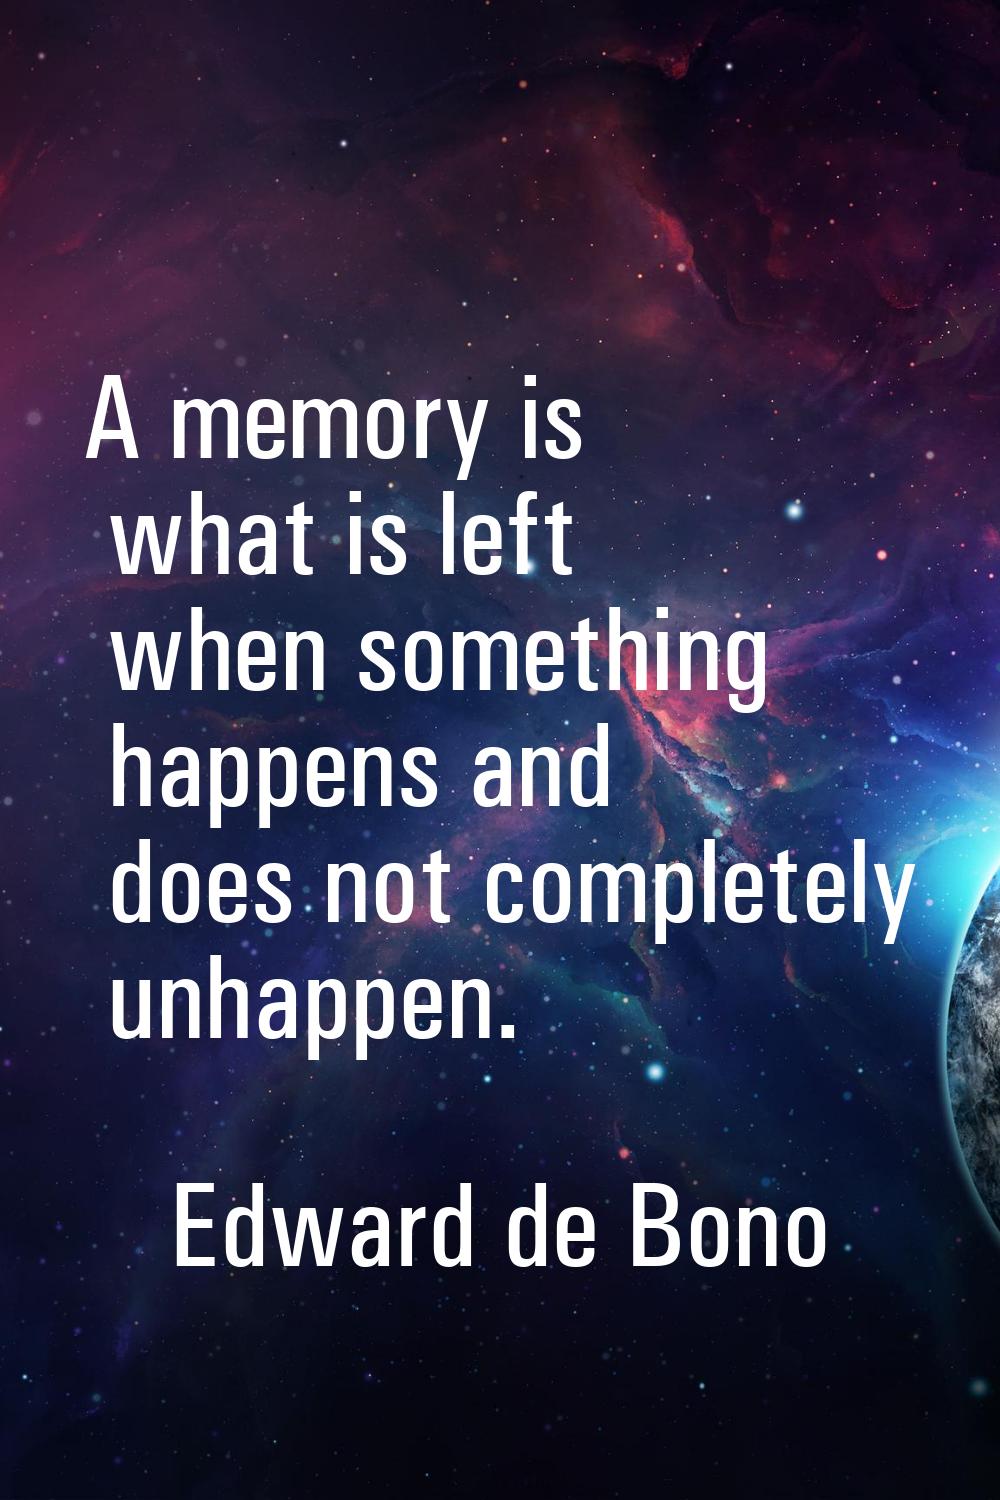 A memory is what is left when something happens and does not completely unhappen.